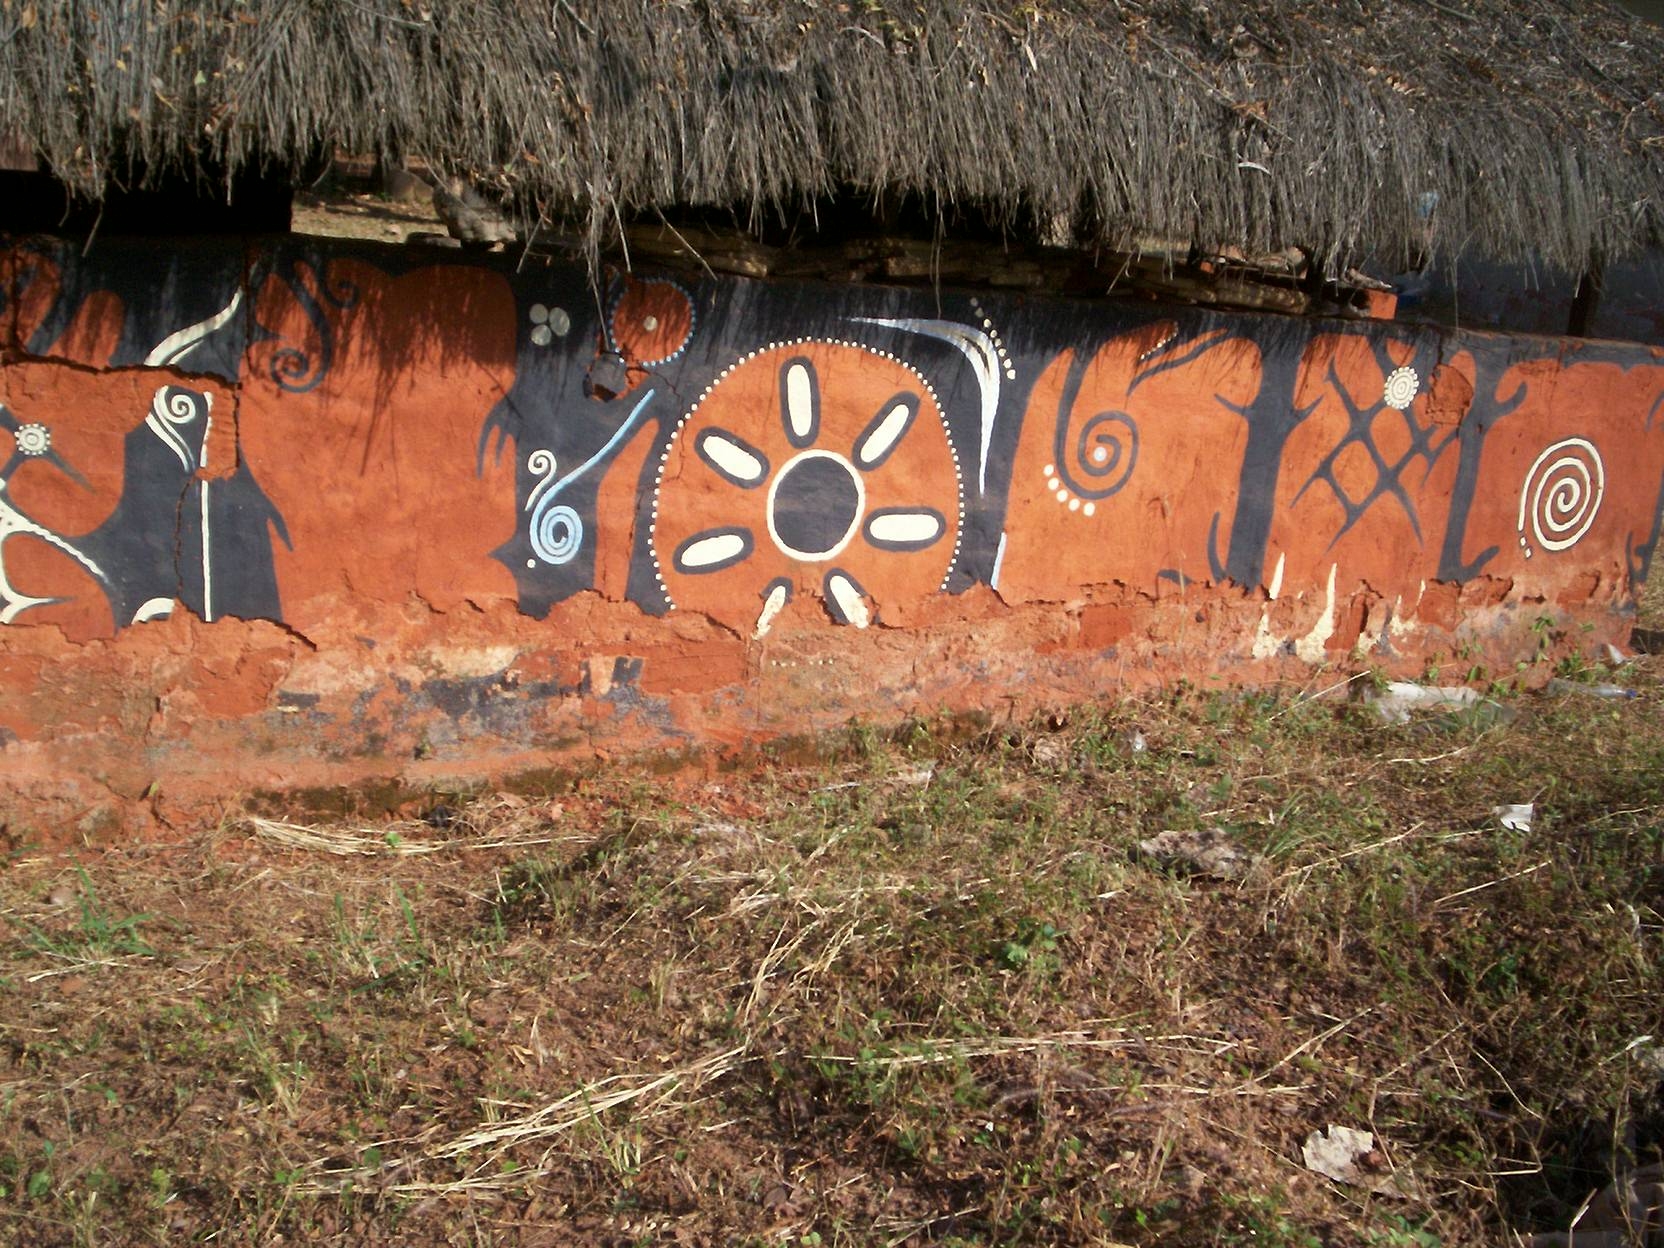 A typical ancient wall painting in parts of southeastern Nigeria, which could be portraying astronomical information. Photo: Johnson Urama